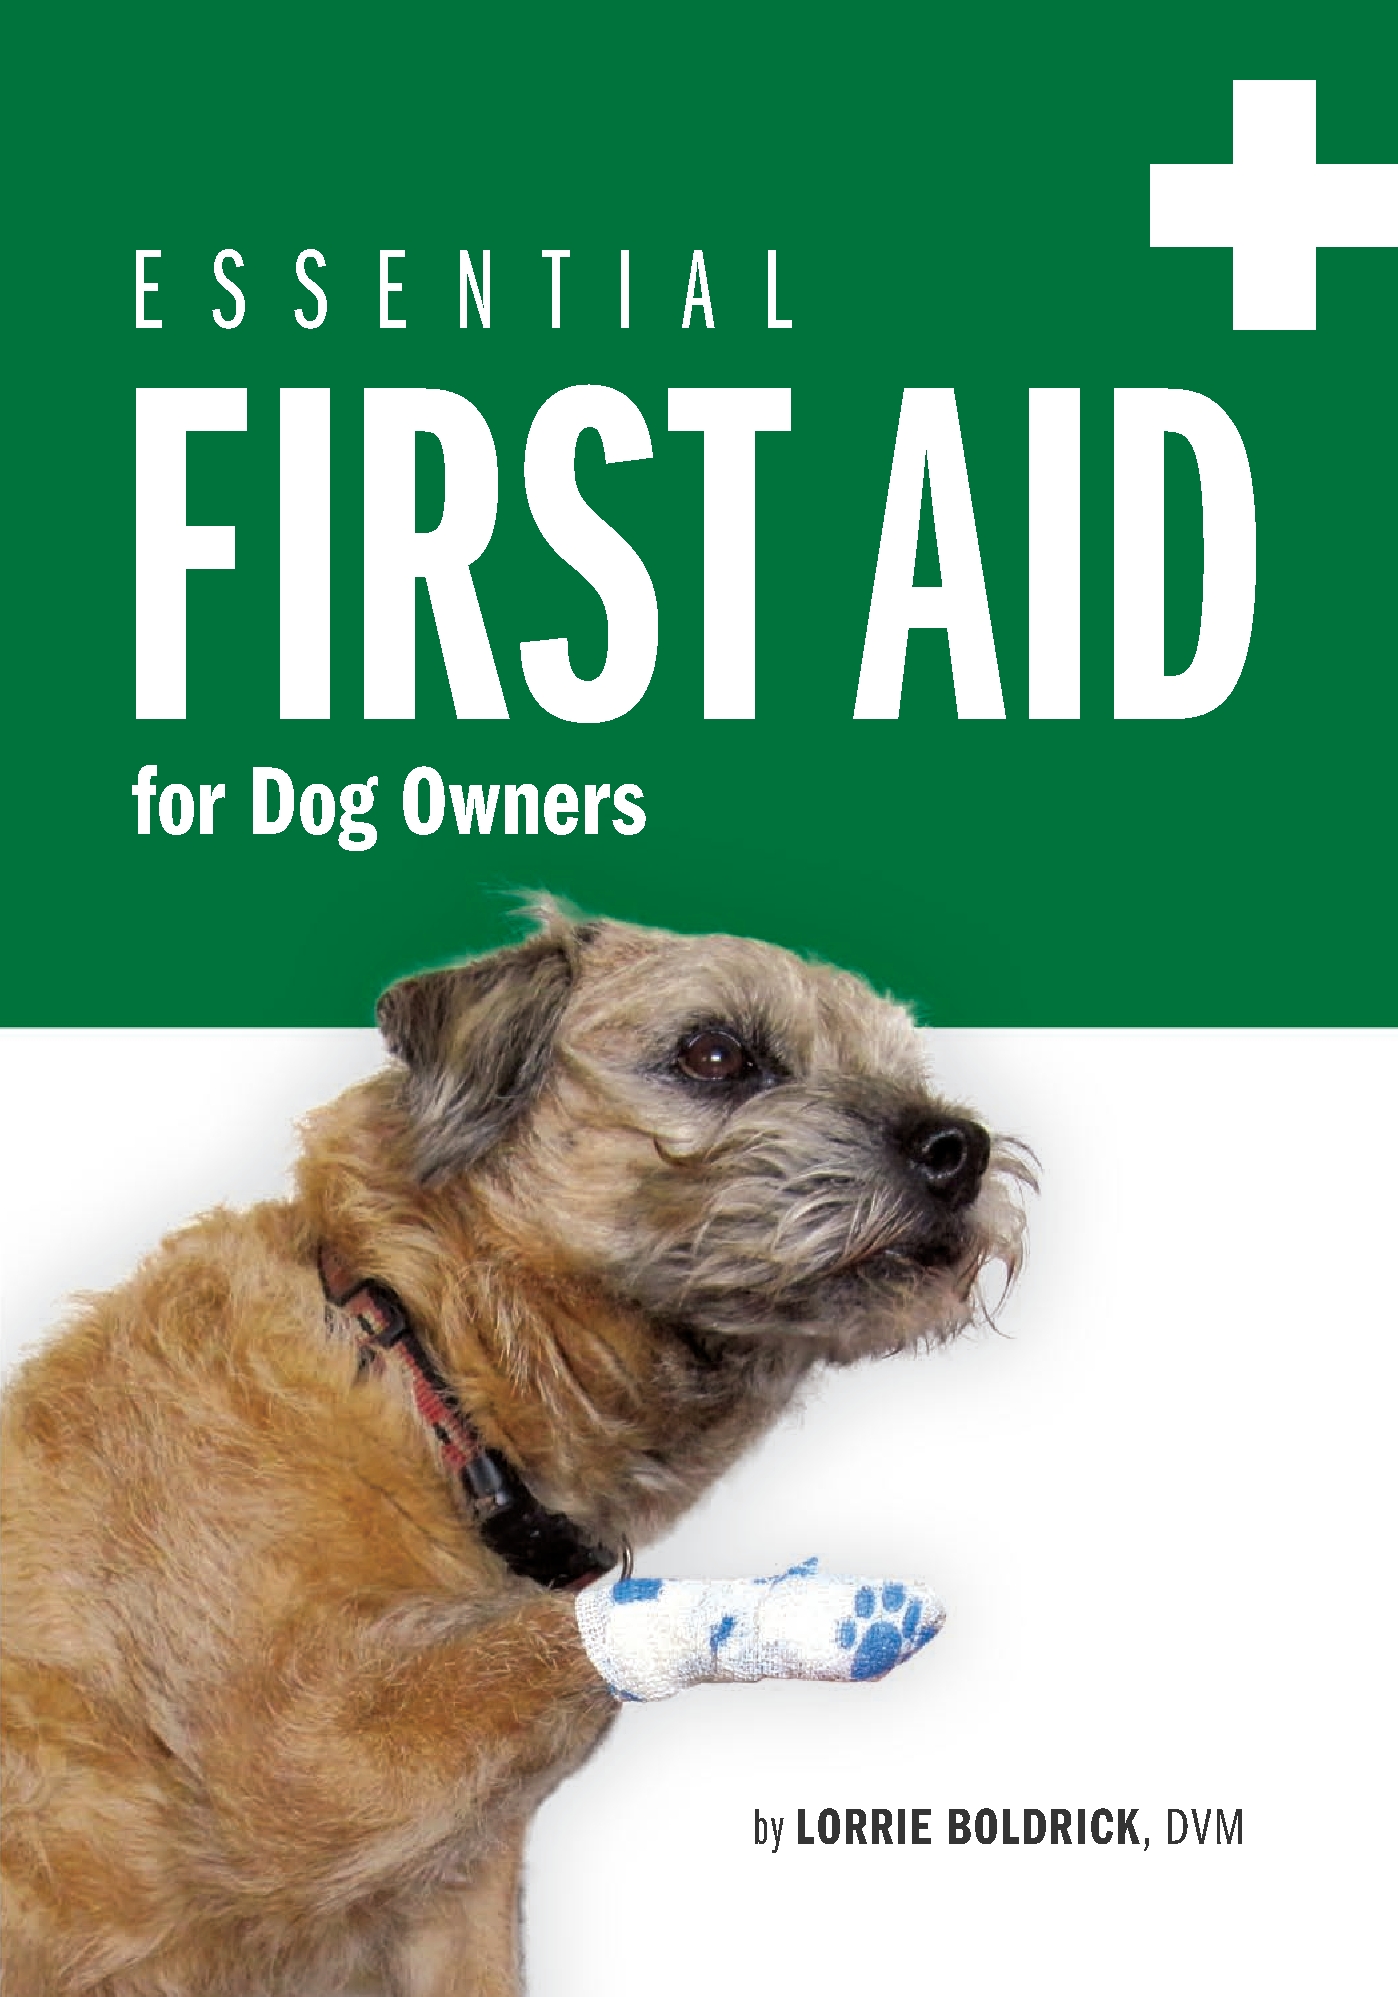 First Aid book cover image